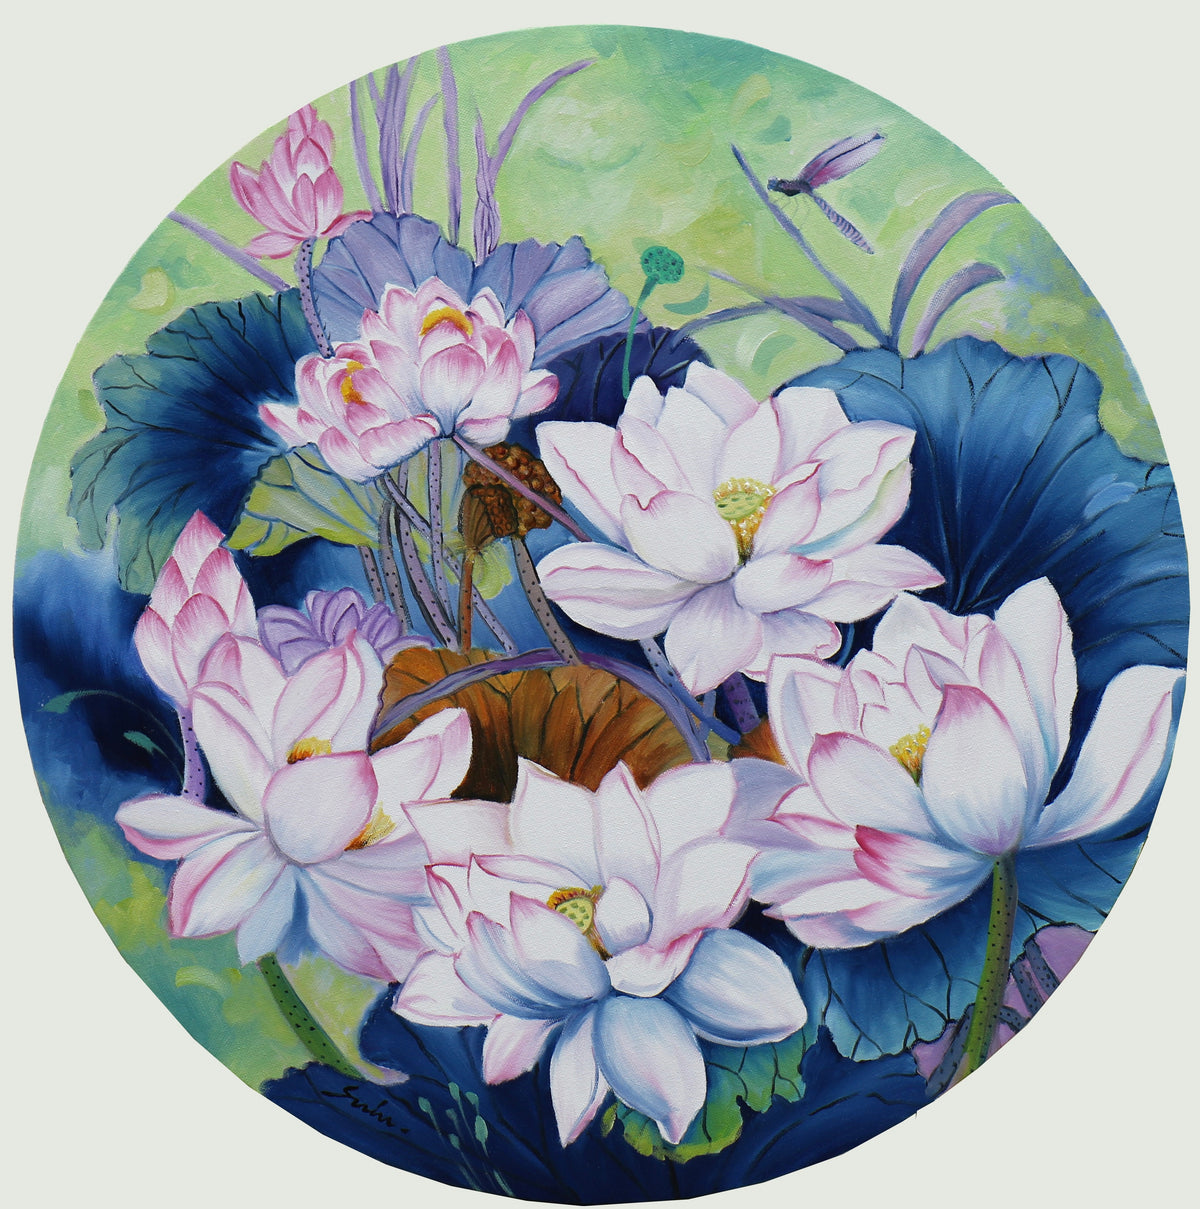 Artist Sulakshana D Olin on Canvas circular painting with louts flowers blooming in pond. 